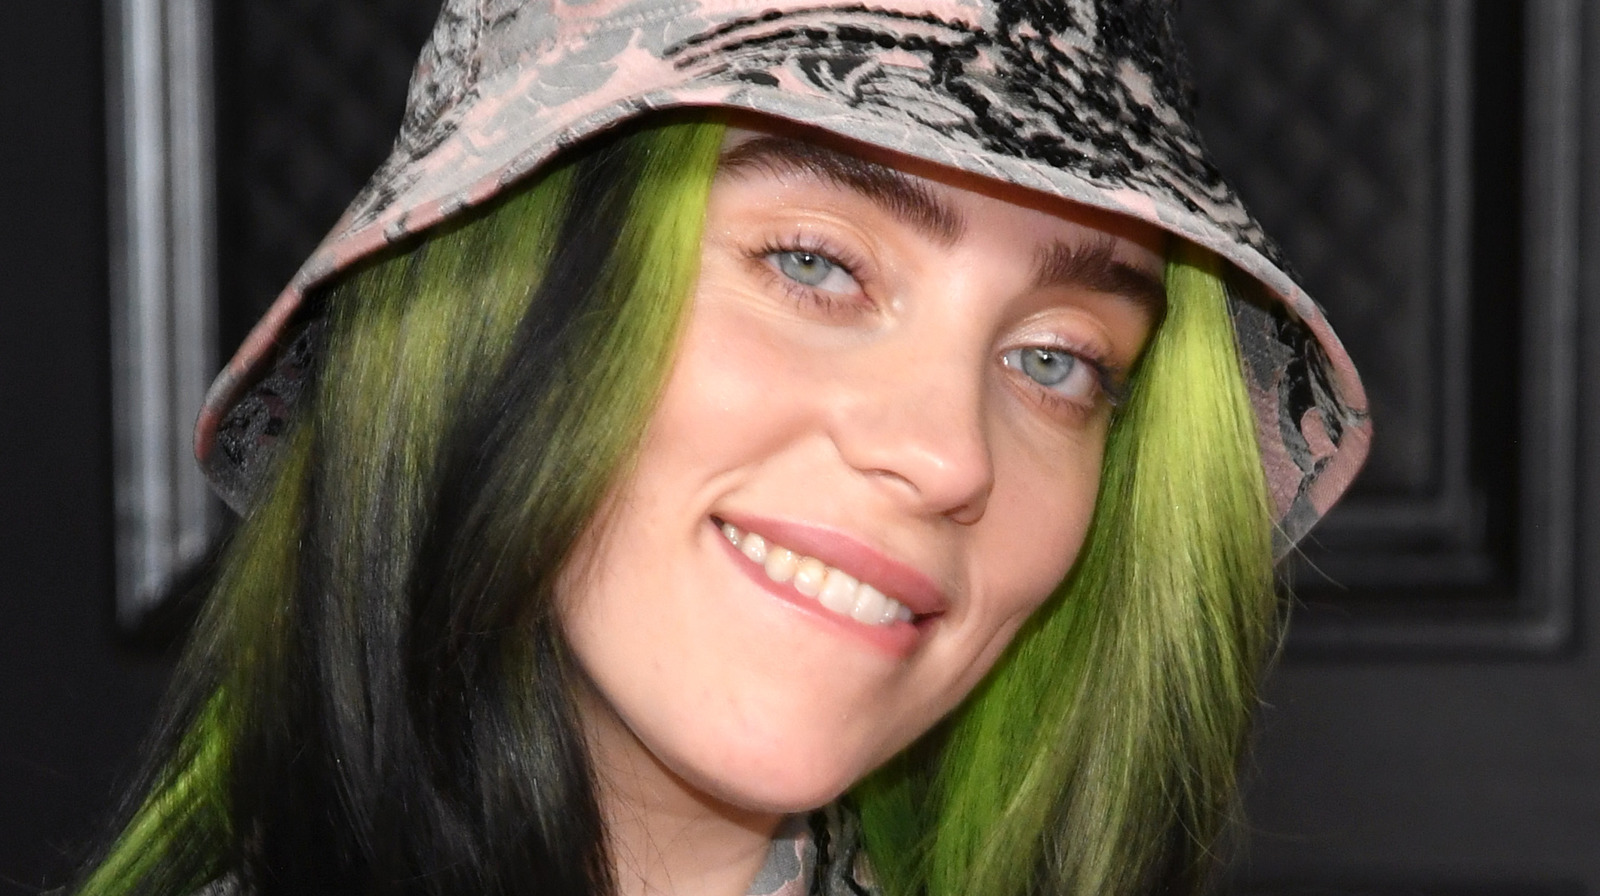 Billie Eilish Smiling with Blue Hair - wide 2